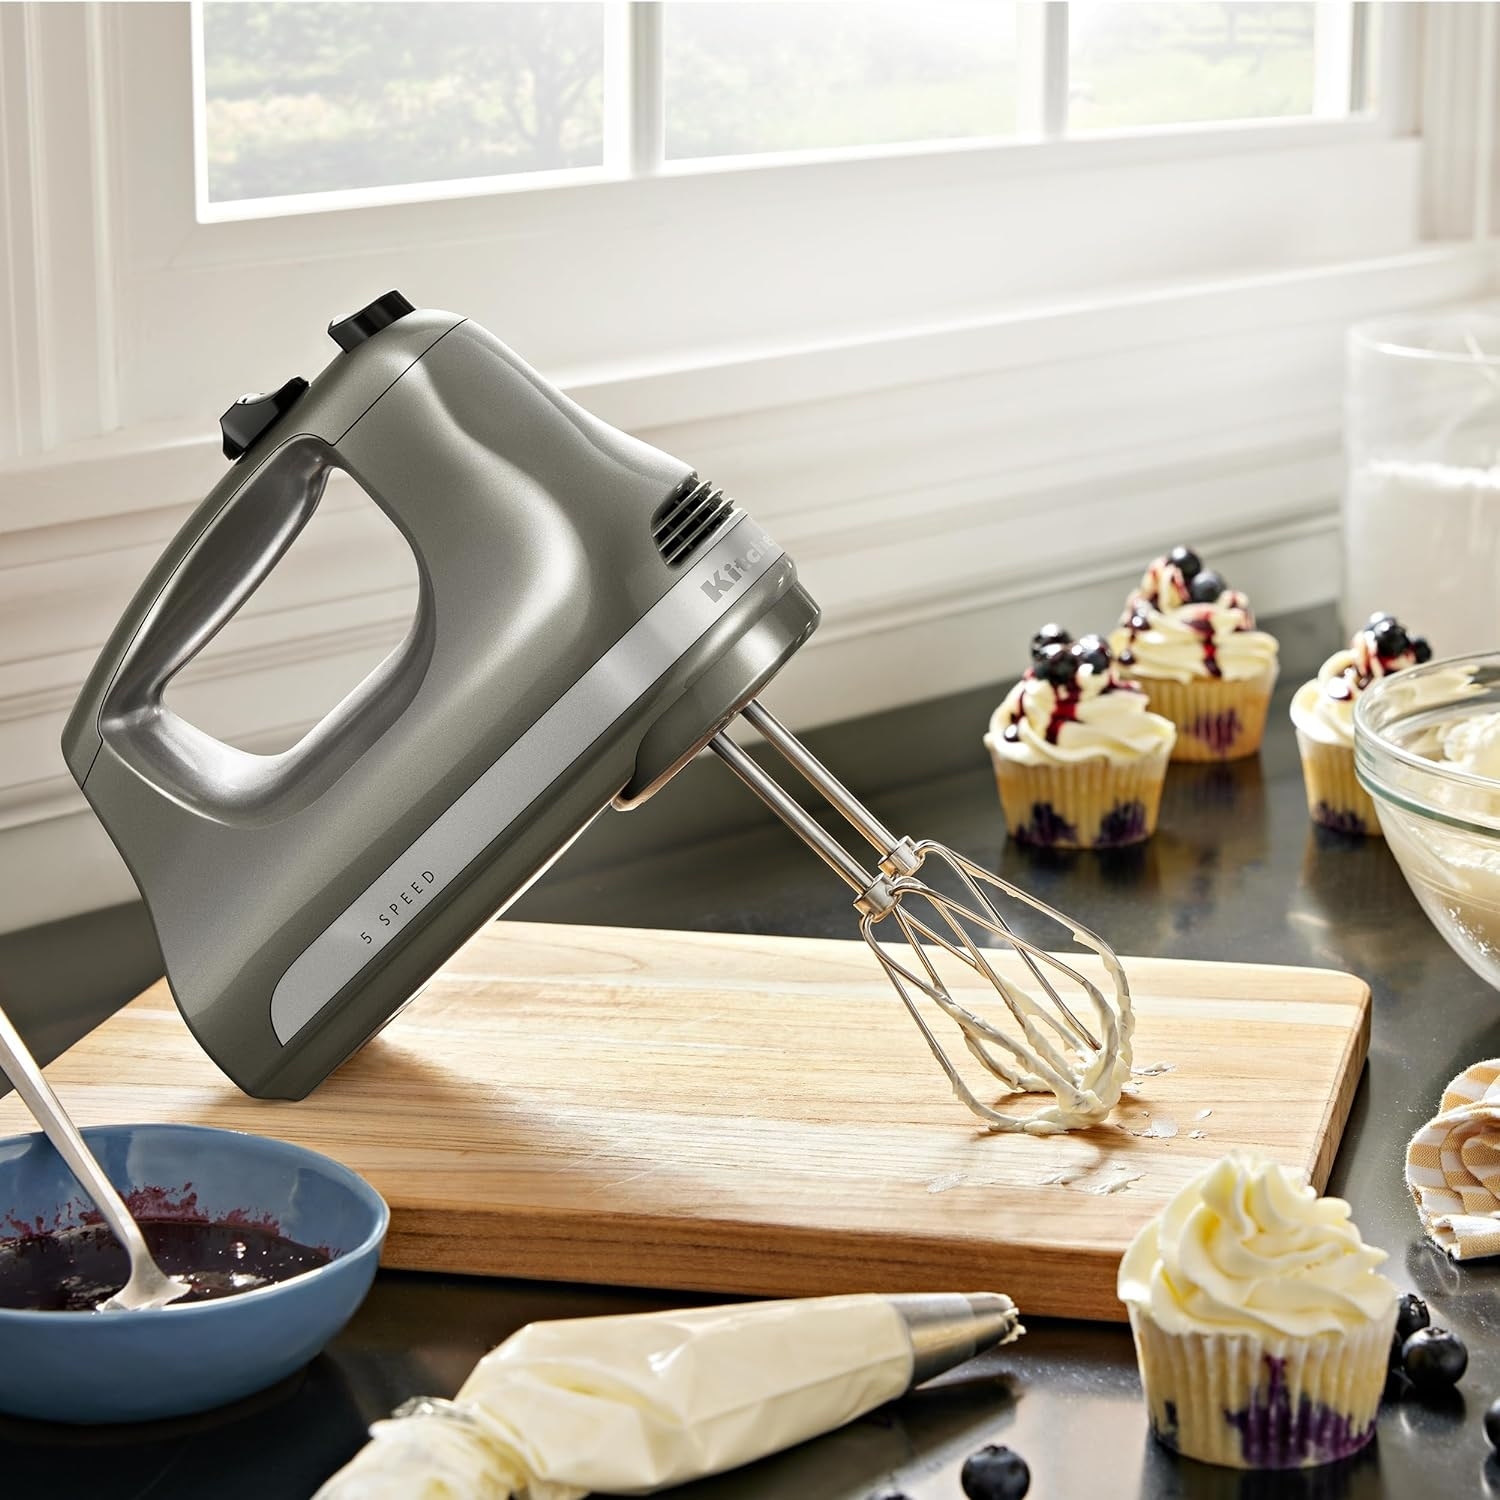 https://ak1.ostkcdn.com/images/products/is/images/direct/f55d7839f3028a6291b12b0edd57cc4d6d830379/5-Ultra-Power-Speed-Hand-Mixer.jpg